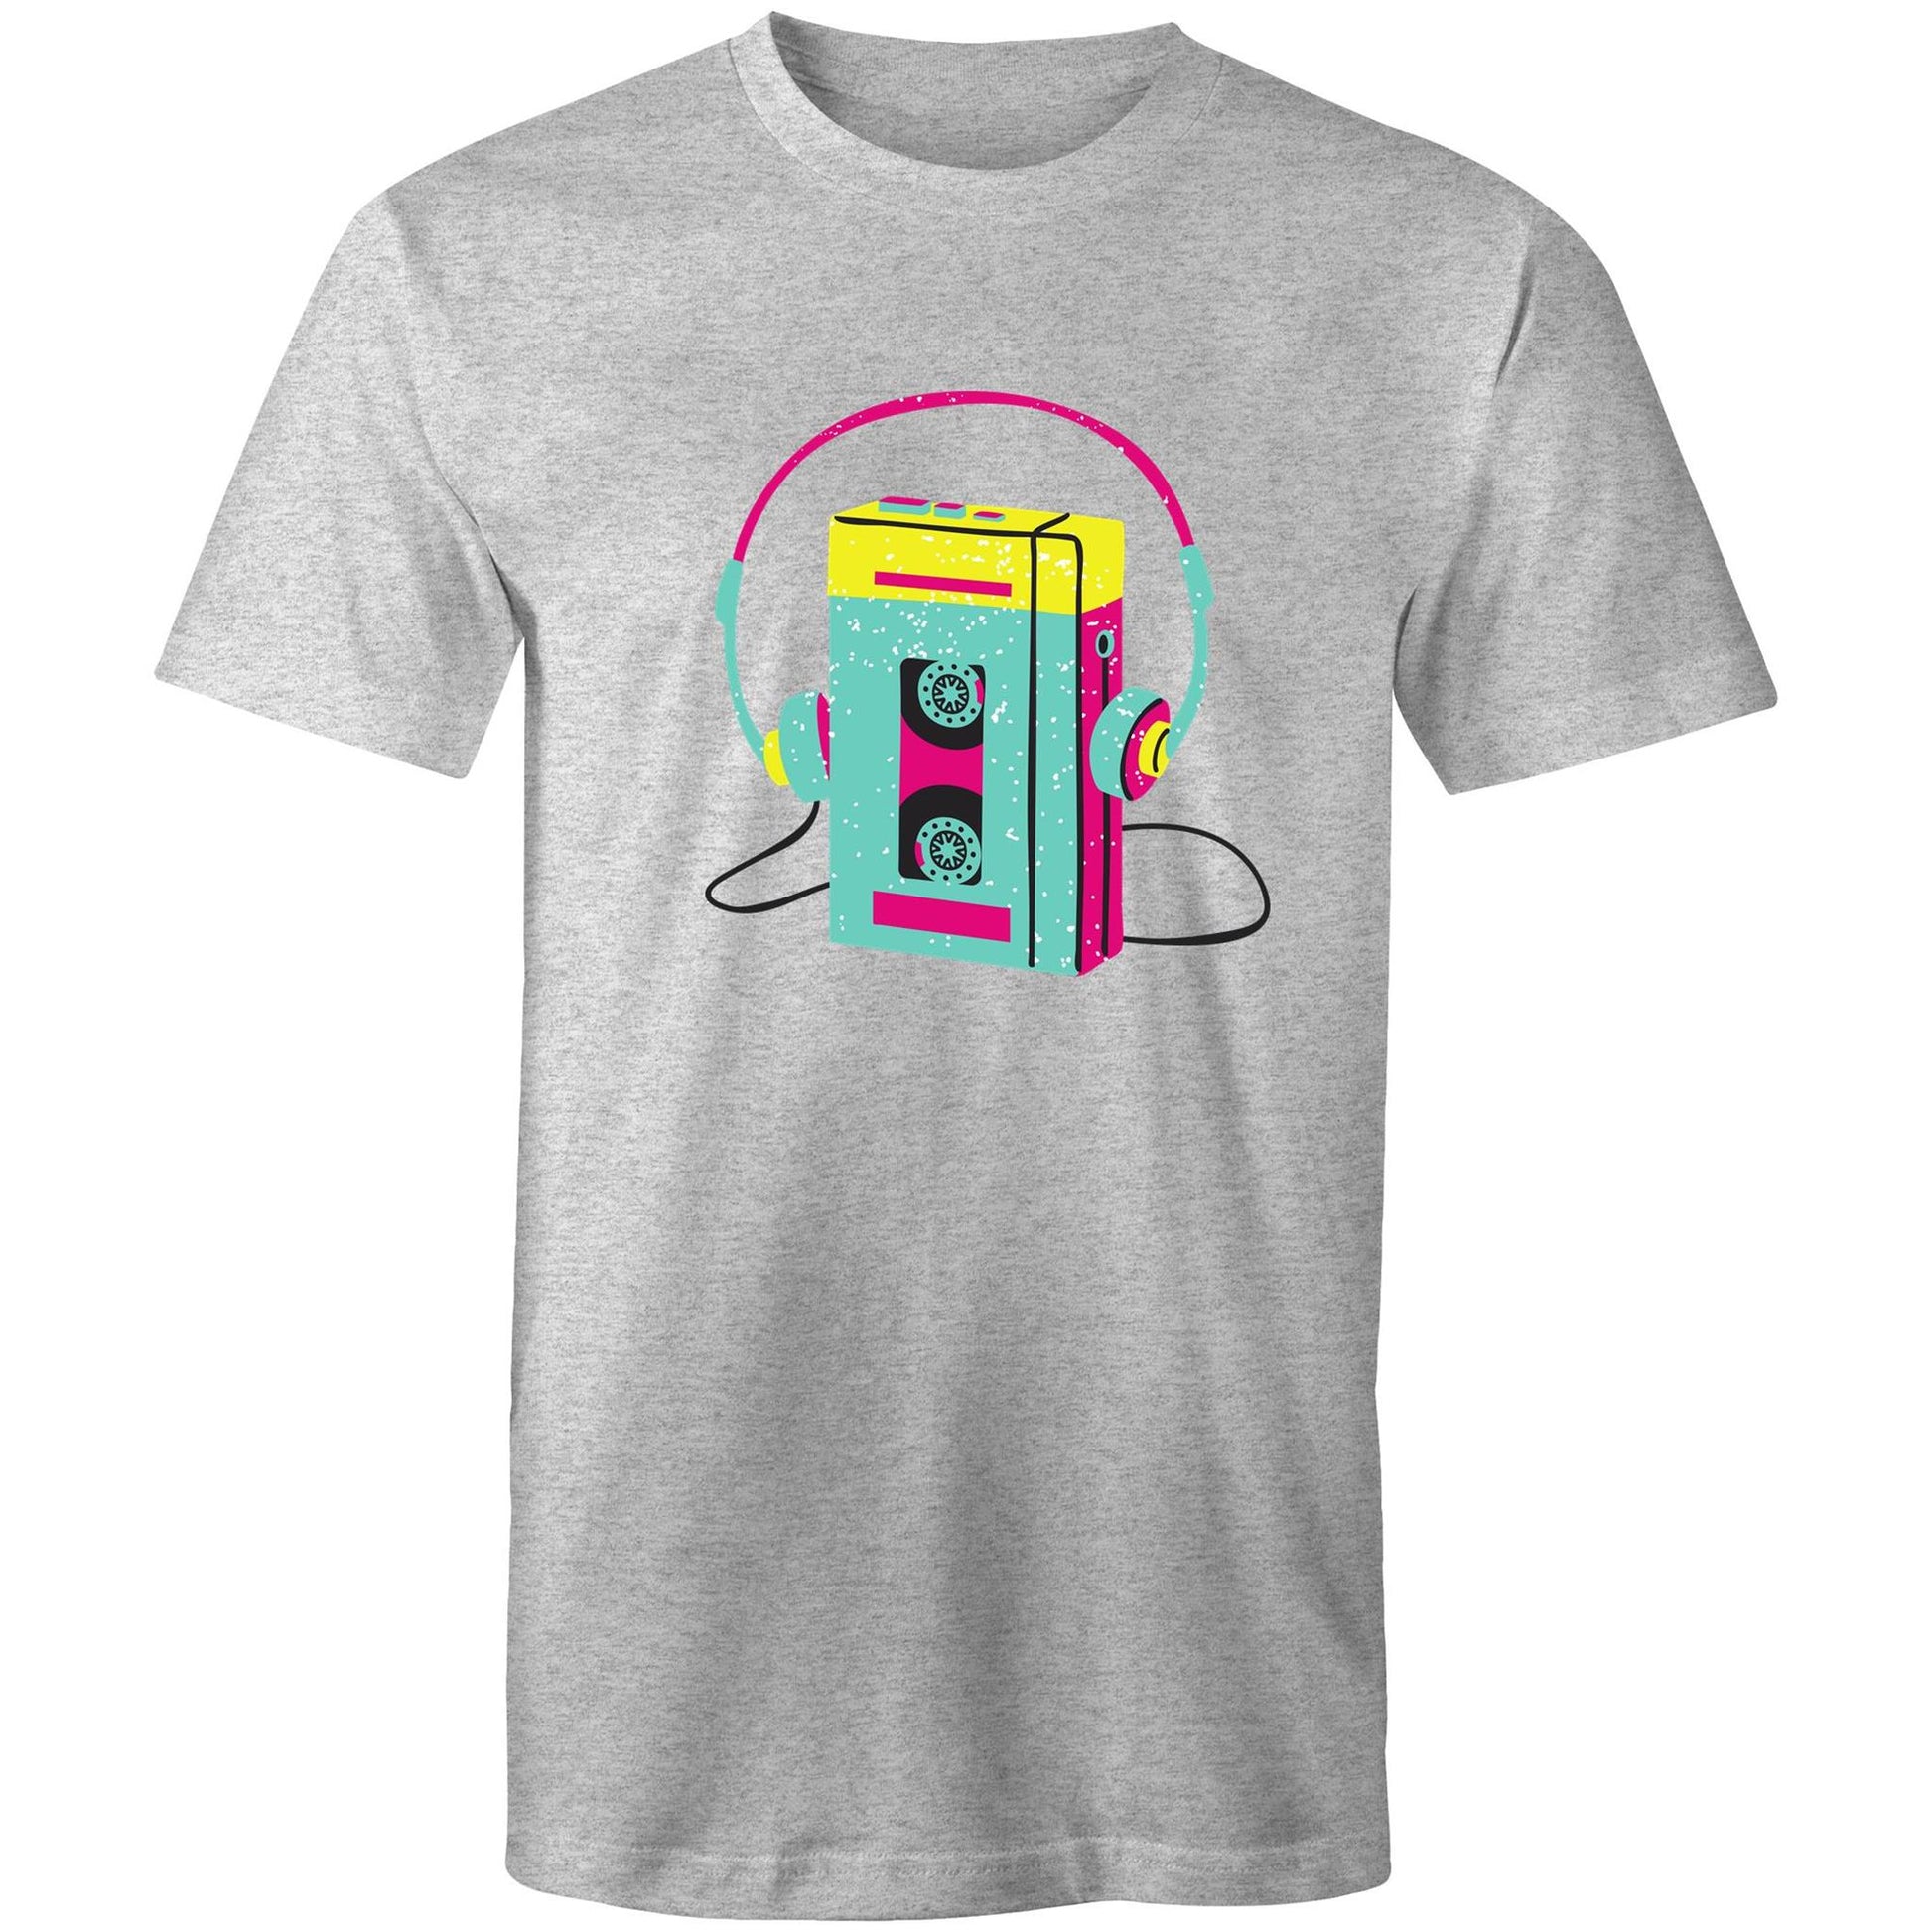 Wired For Sound, Music Player - Mens T-Shirt Grey Marle Mens T-shirt Mens Music Retro